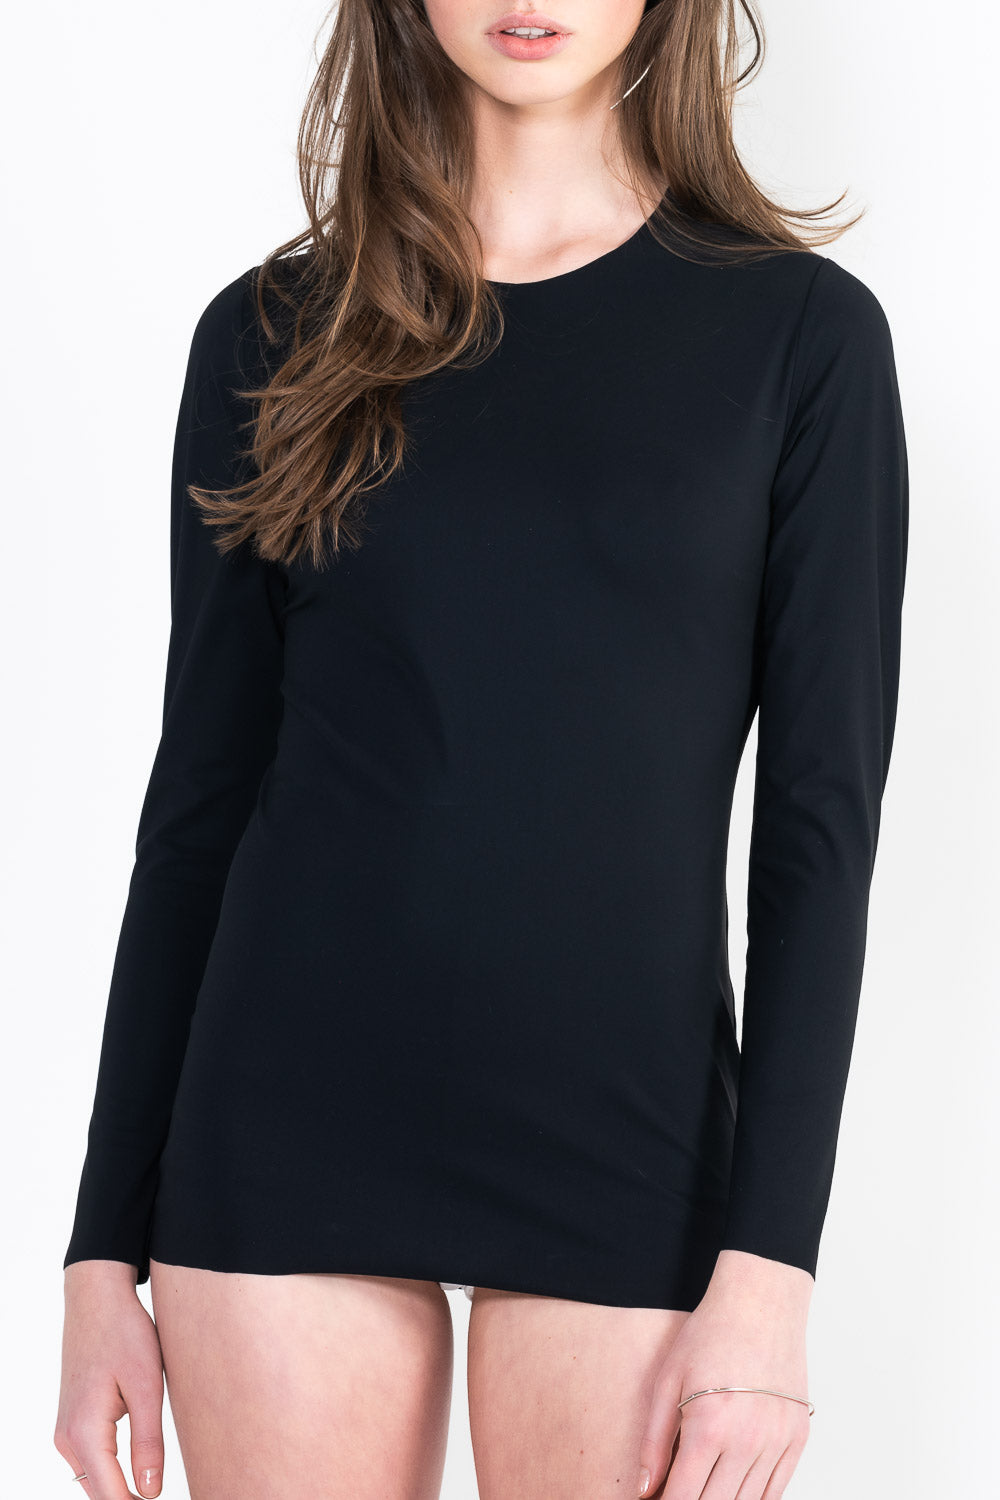 L34 Wide long-sleeved top